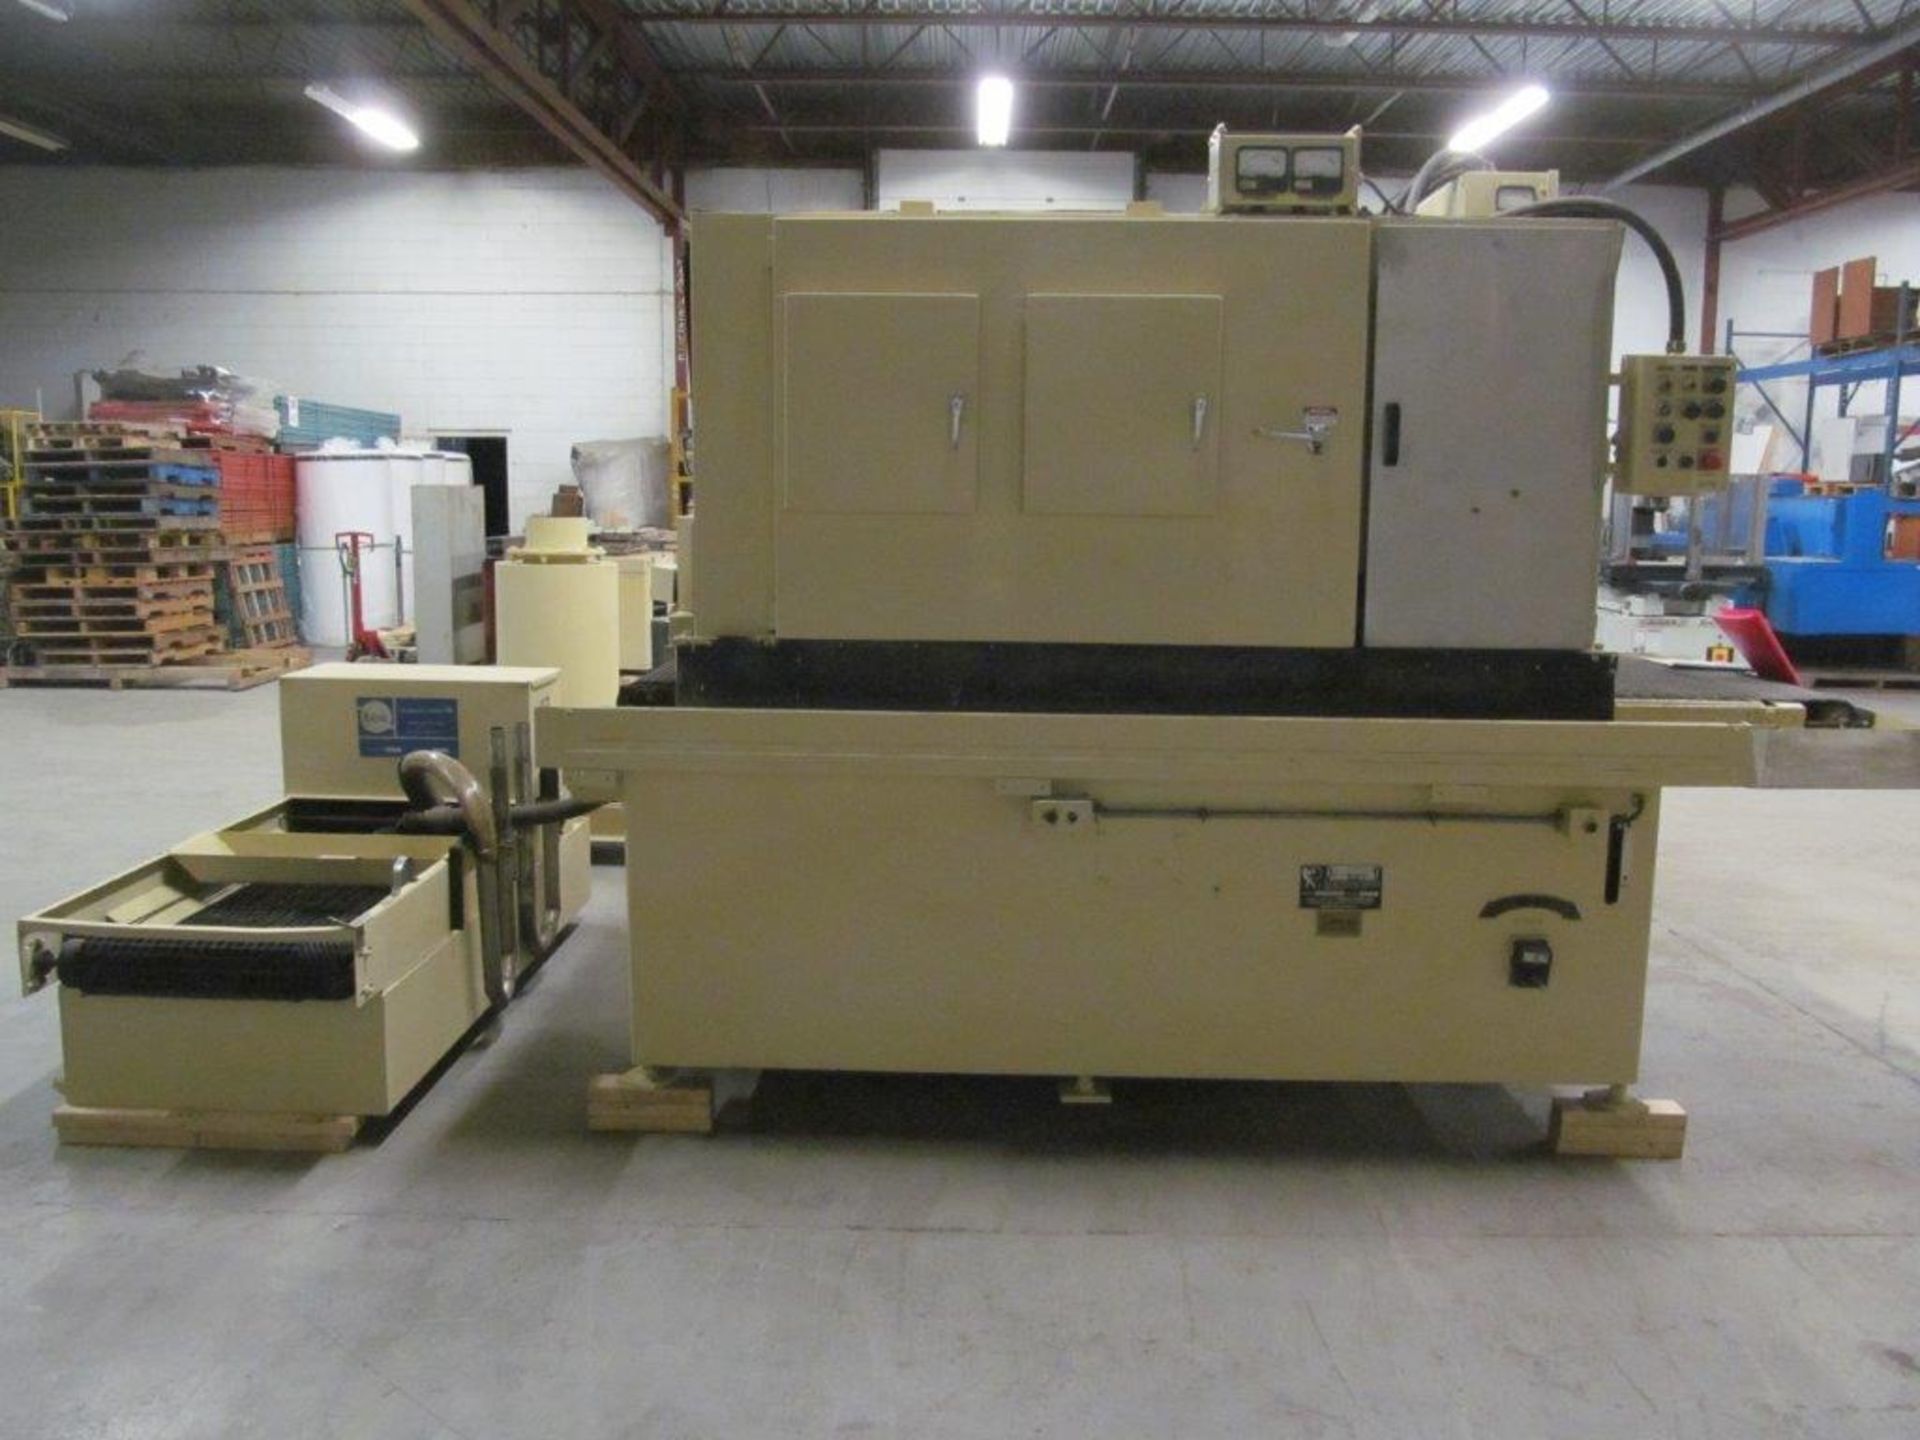 TIMESAVER MODEL 237-2CMPLW, S/N: 19989, 36" WIDE MATERIAL WET TYPE, ELECTRICS: 575 V / 3PH / 60C, - Image 11 of 14